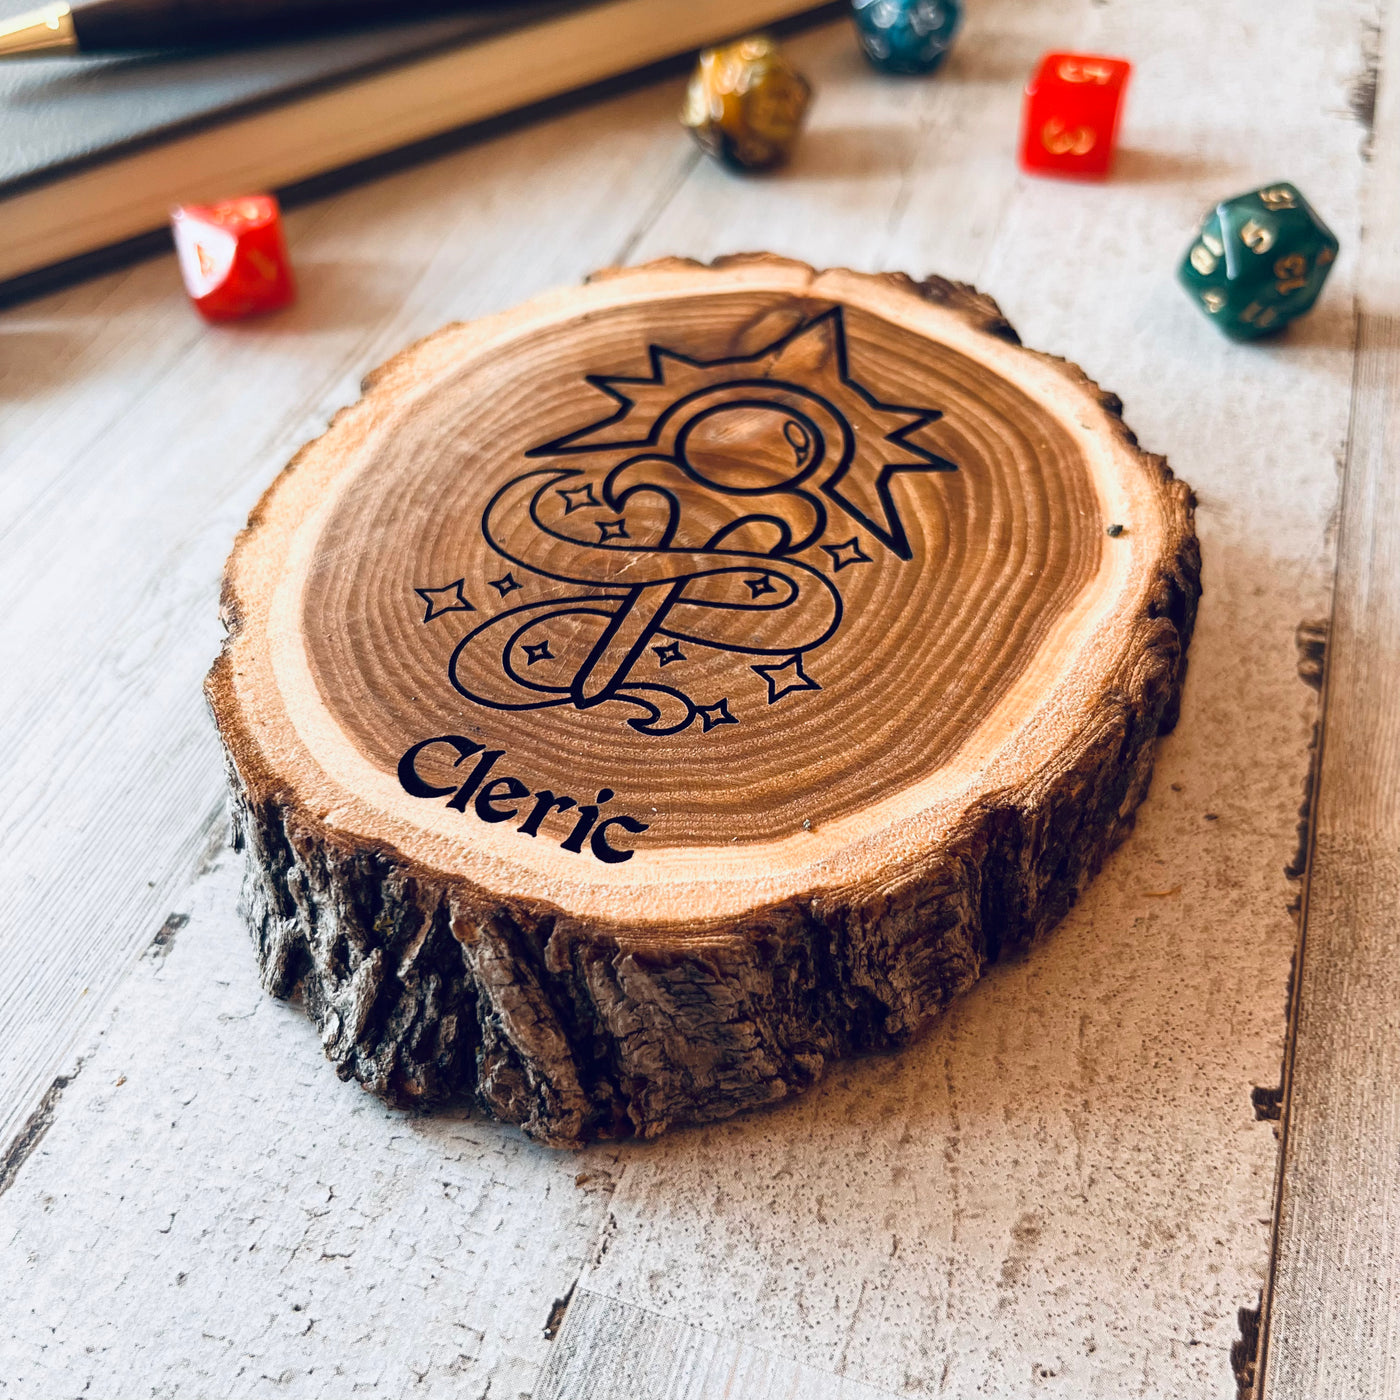 Dungeons and Dragons Real Wood Cleric DnD Coaster | DnD Accessories | DnD Gift for Men | Dungeon Master Gift | DnD Stuff | D&D Gifts